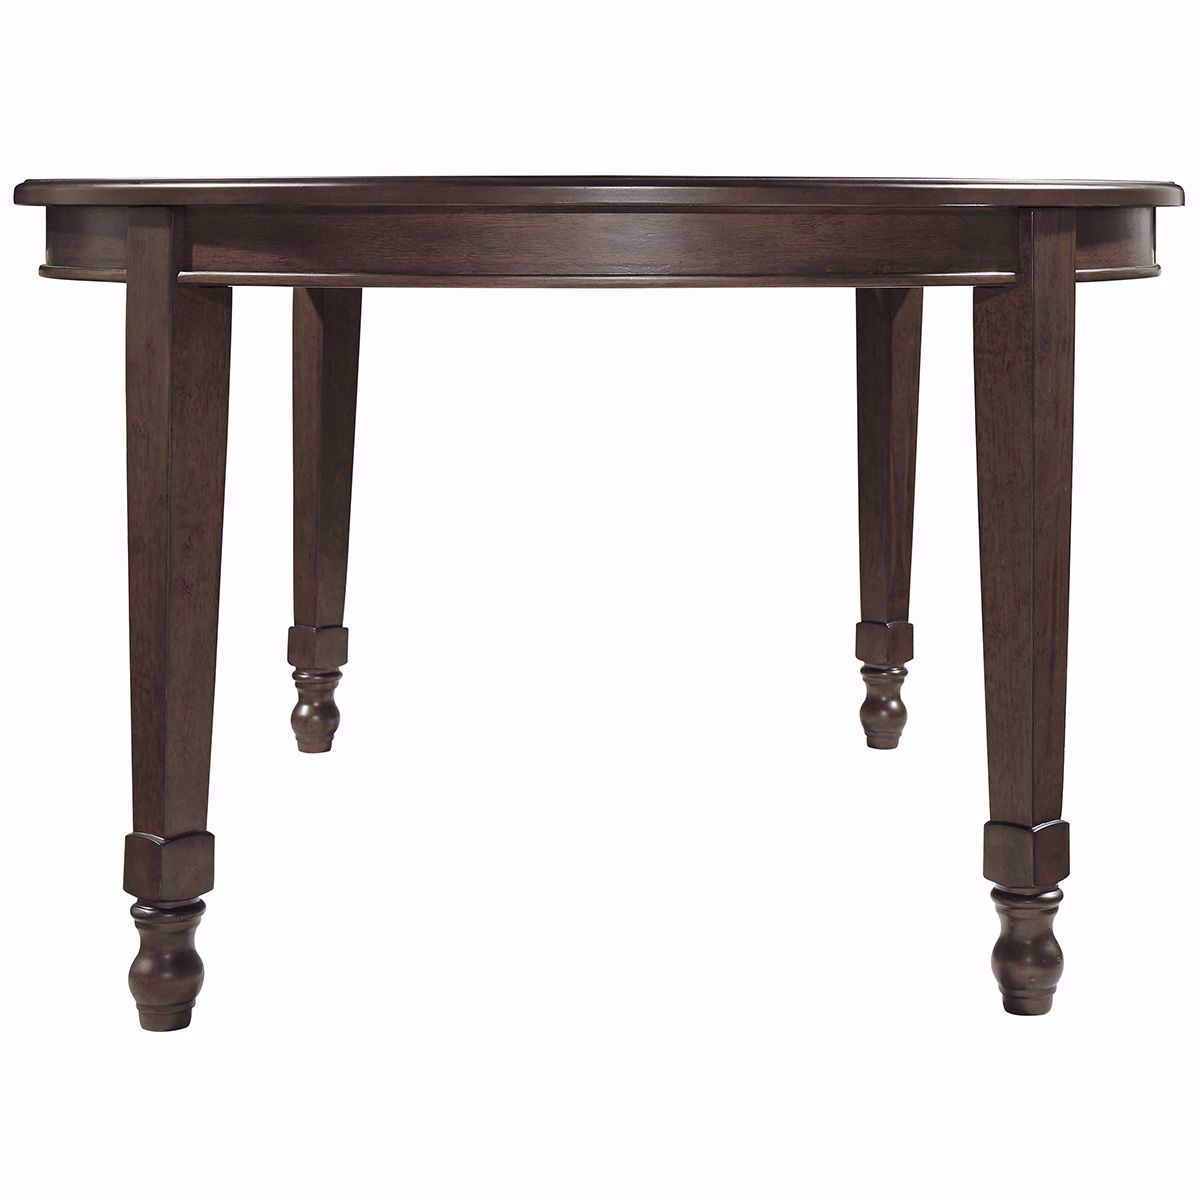 Picture of Arlington Dining Room Table